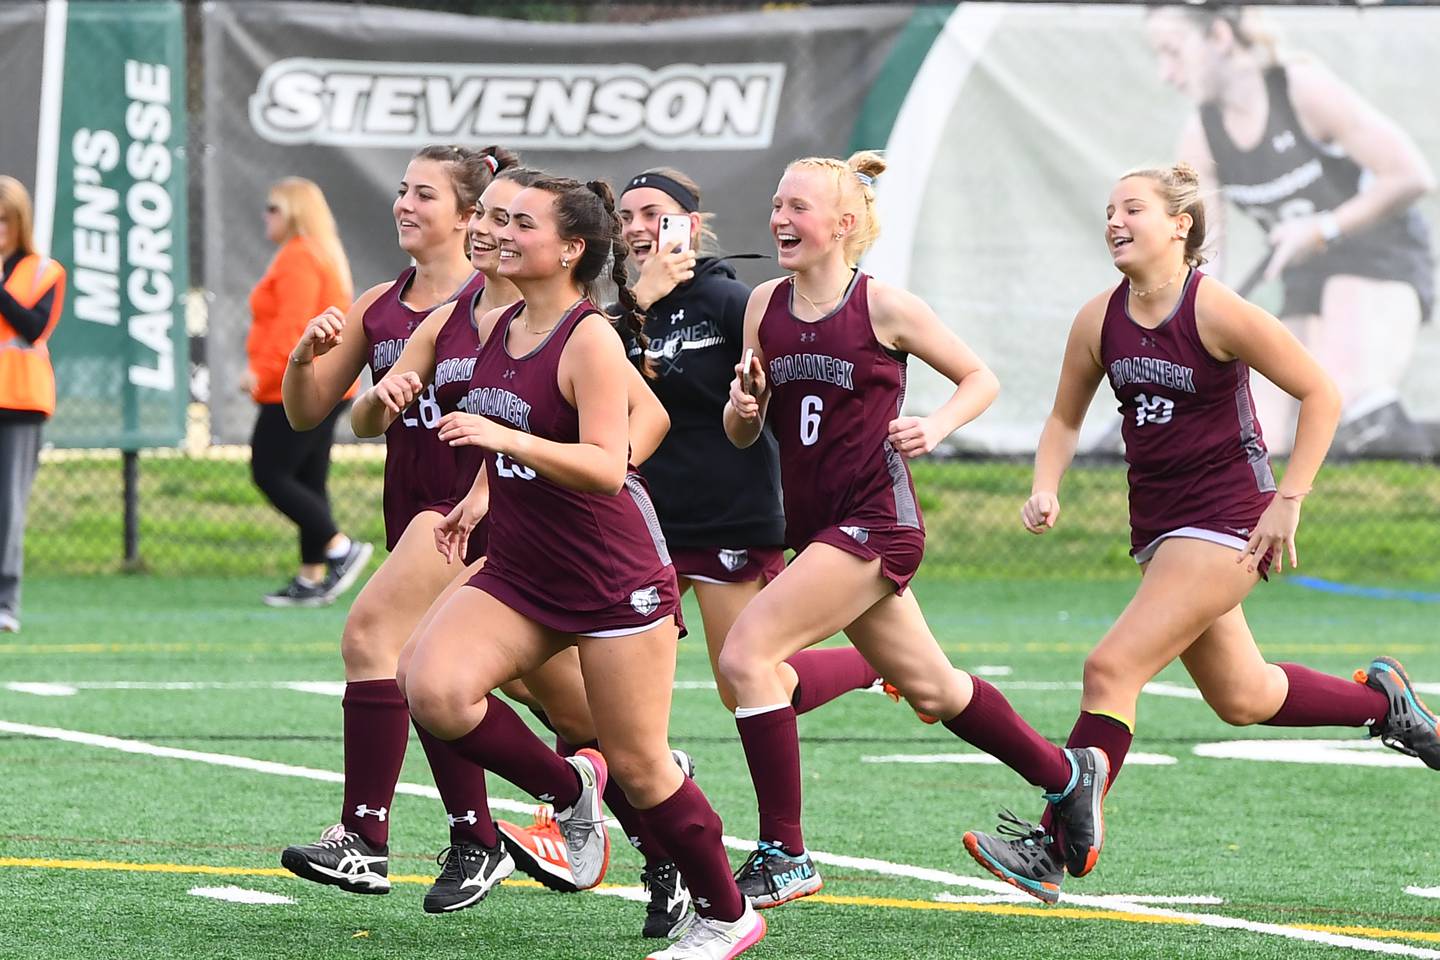 Broadneck players rush onto the field at Stevenson University to celebrate their first field hockey state title in 20 years.